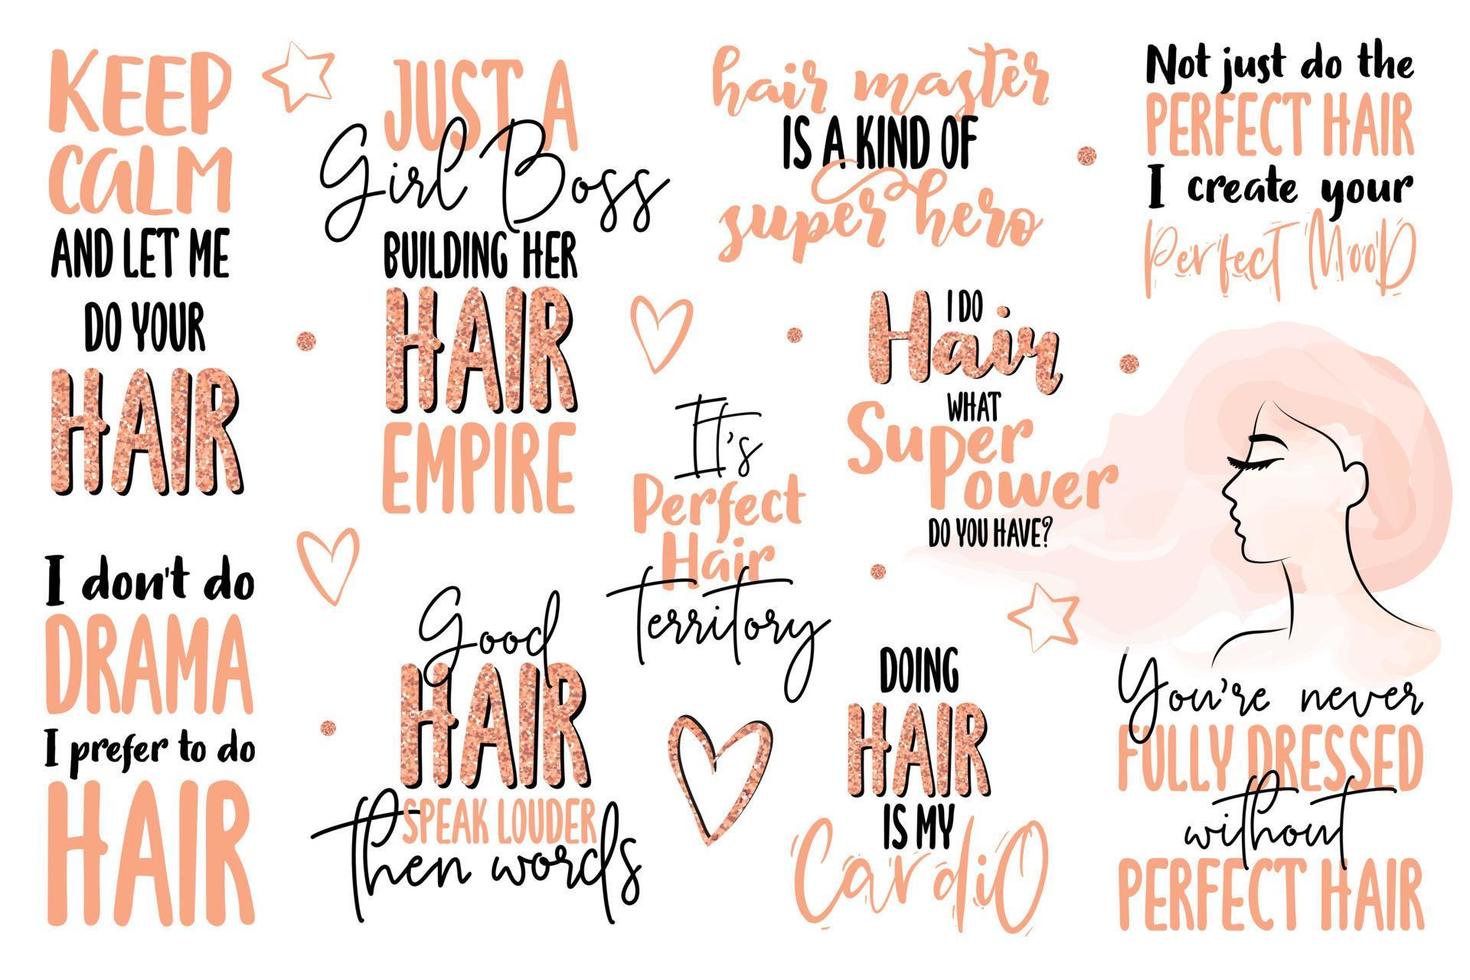 Inspiration lettering quotes about hair and hairstyle.  Peach color with glitter. For hairdressers, beauty salons, stylists, printing production, social media. vector